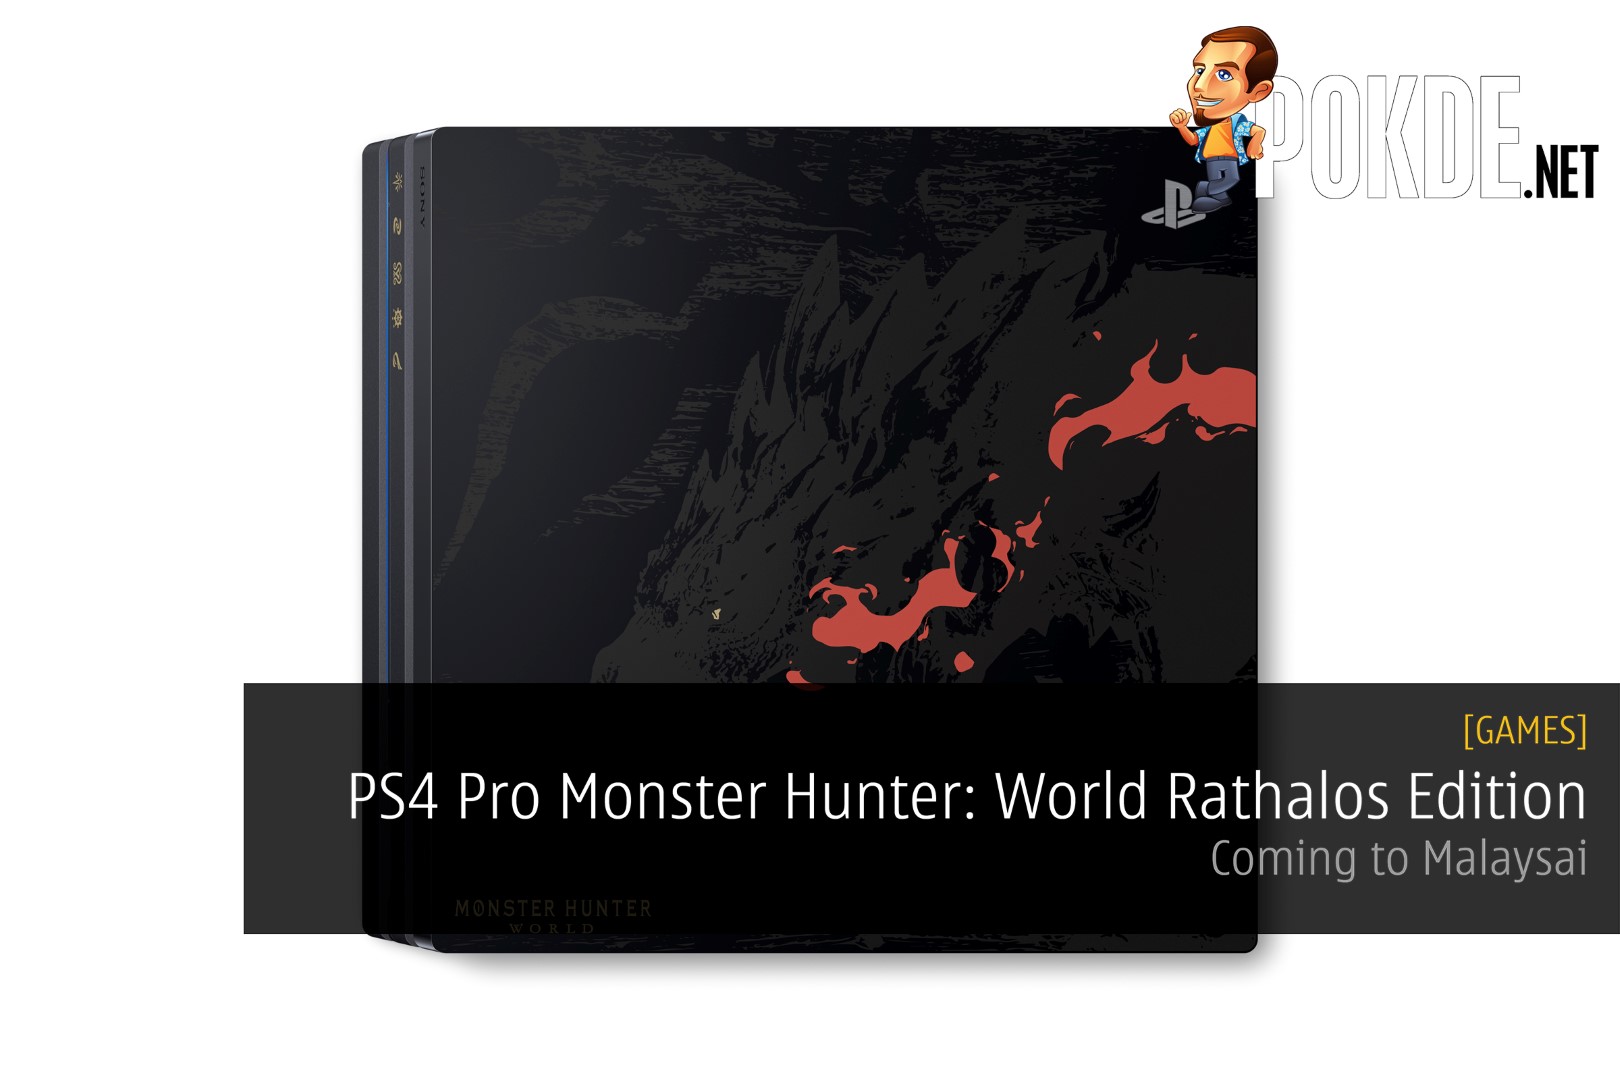 PS4 Pro Monster Hunter: World Rathalos Edition Is Coming To Malaysia! 25